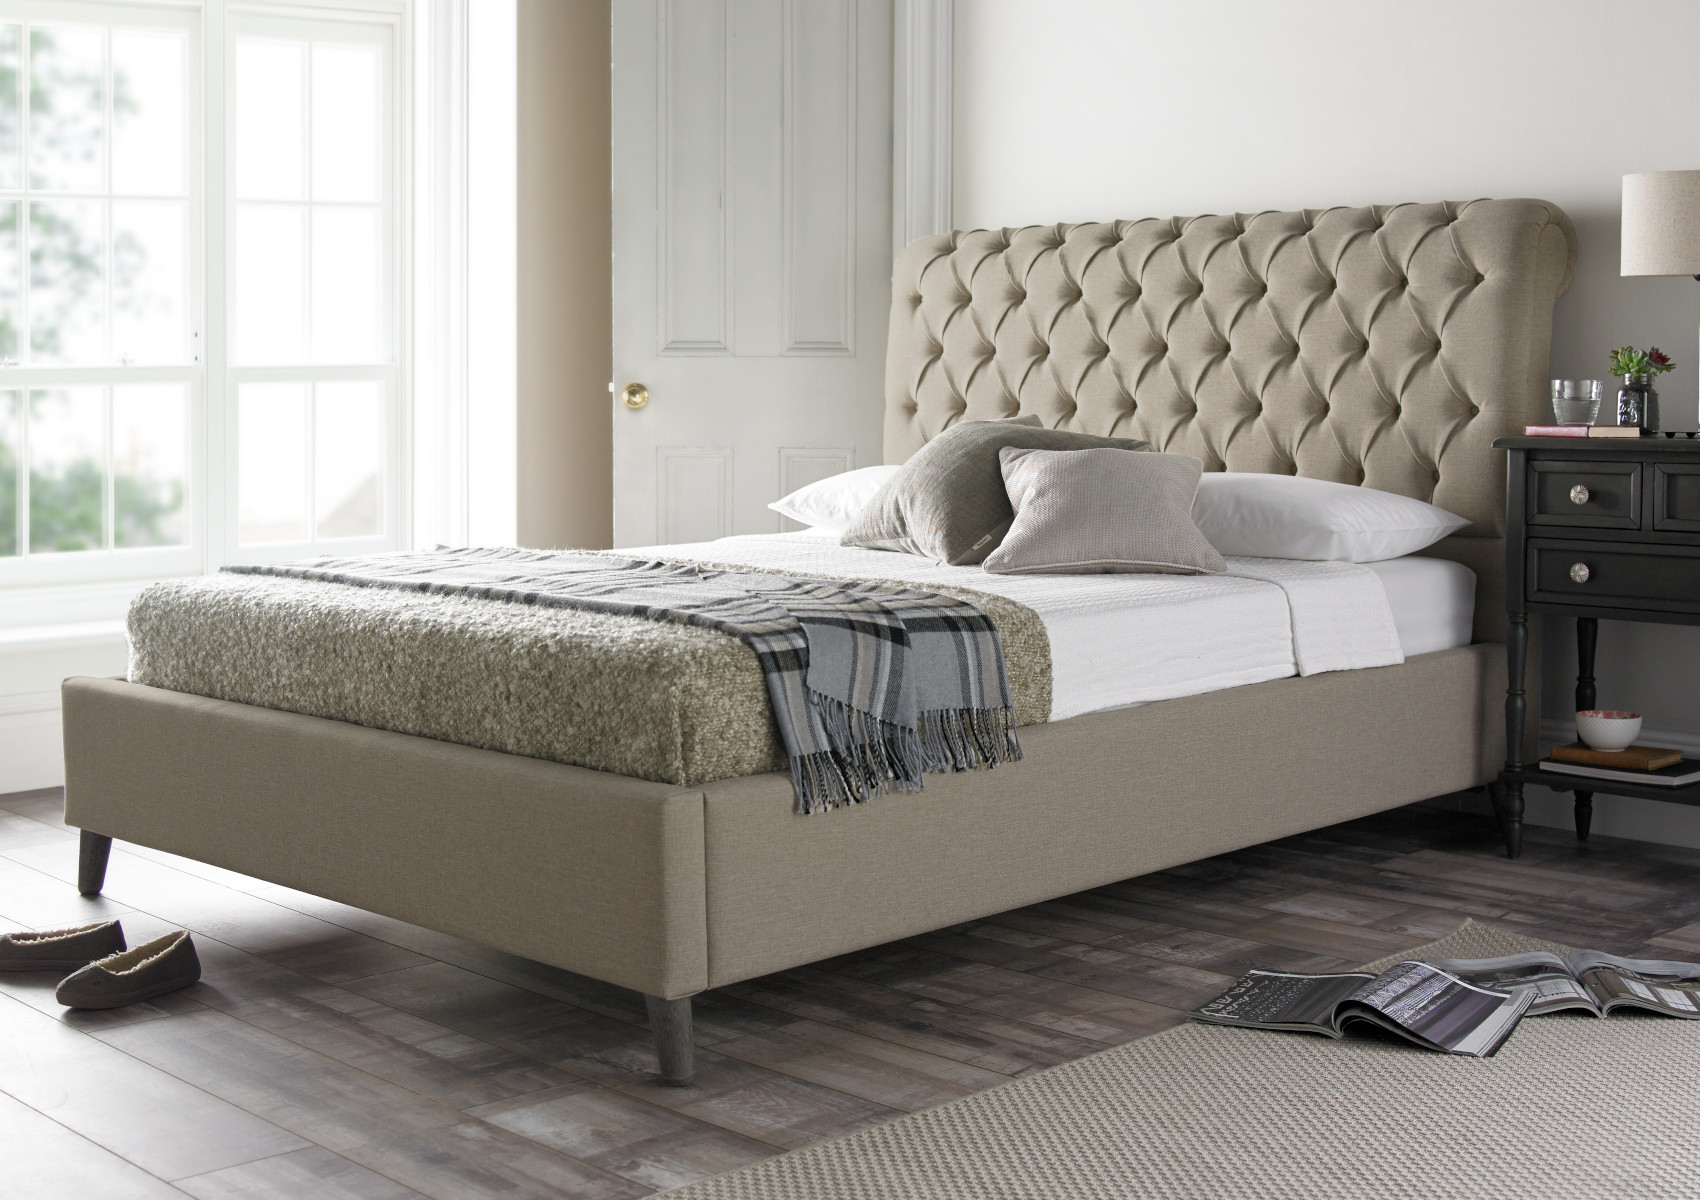 View Chester Arran Natural Upholstered Double Bed Time4Sleep information